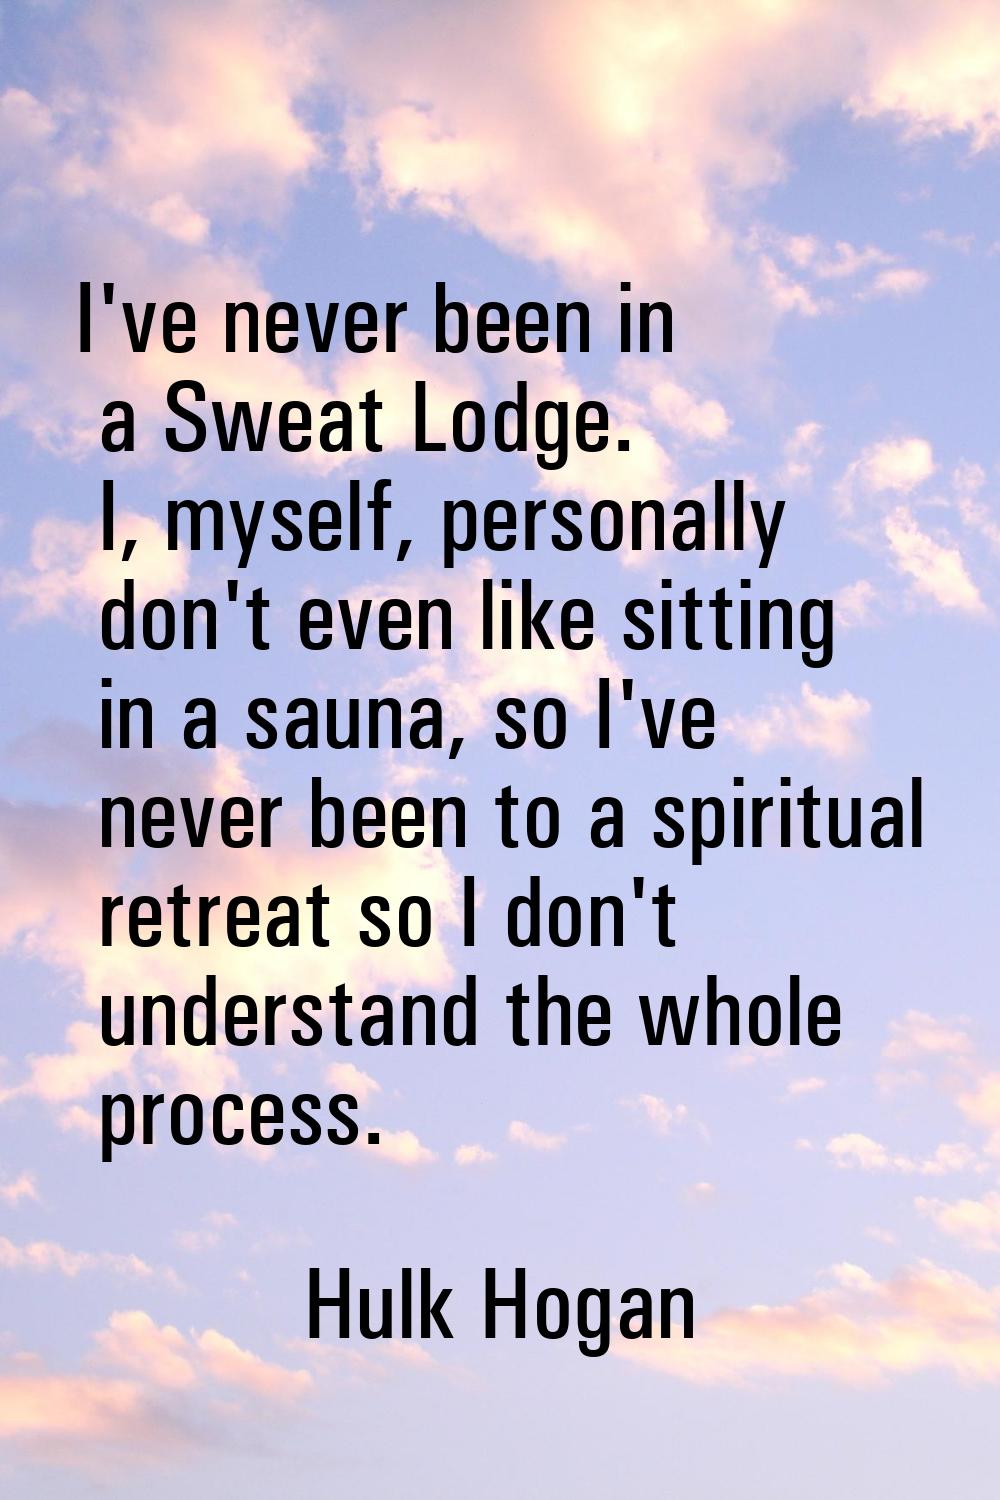 I've never been in a Sweat Lodge. I, myself, personally don't even like sitting in a sauna, so I've